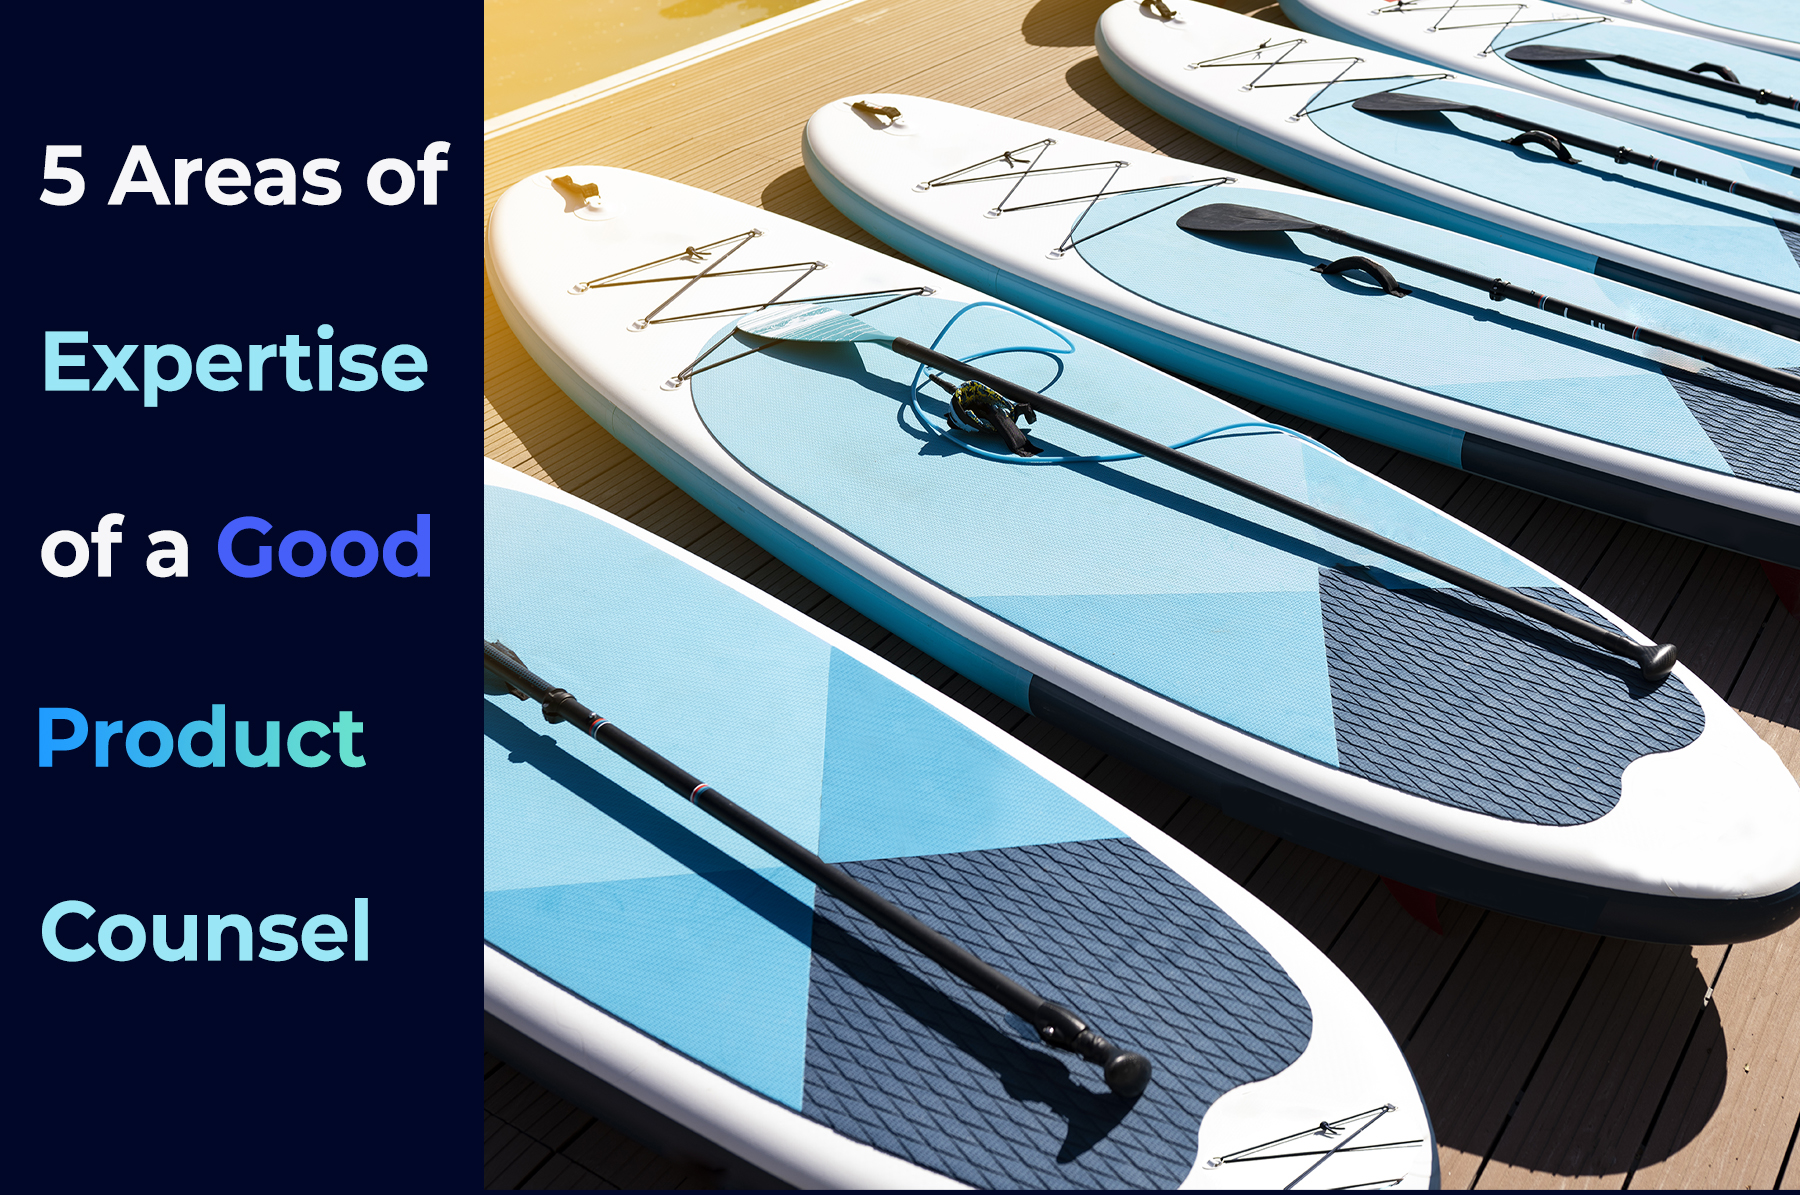 A batch of paddle boards ready to hit the market with the phrase ”five areas of expertise of a good product counsel”. Al in blue tones